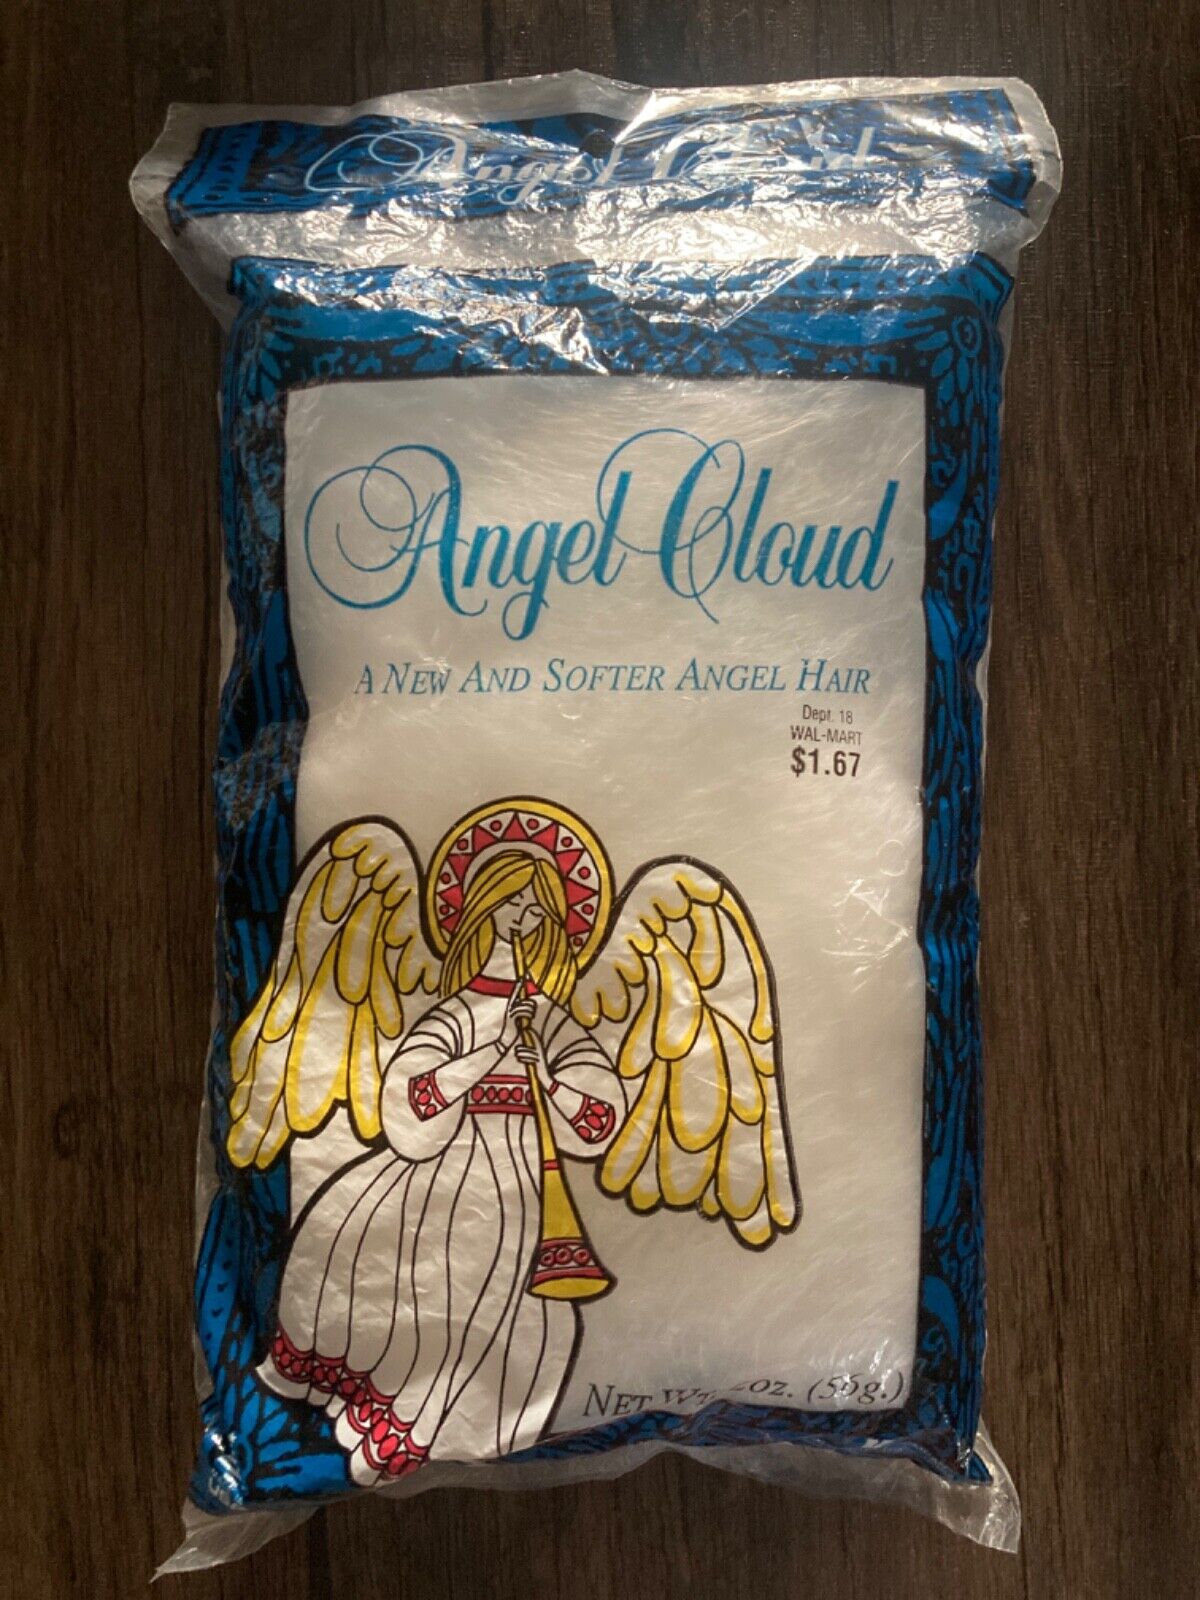 Vintage Angel Cloud New and Softer Angel Hair Christmas Holiday Decorating NIP